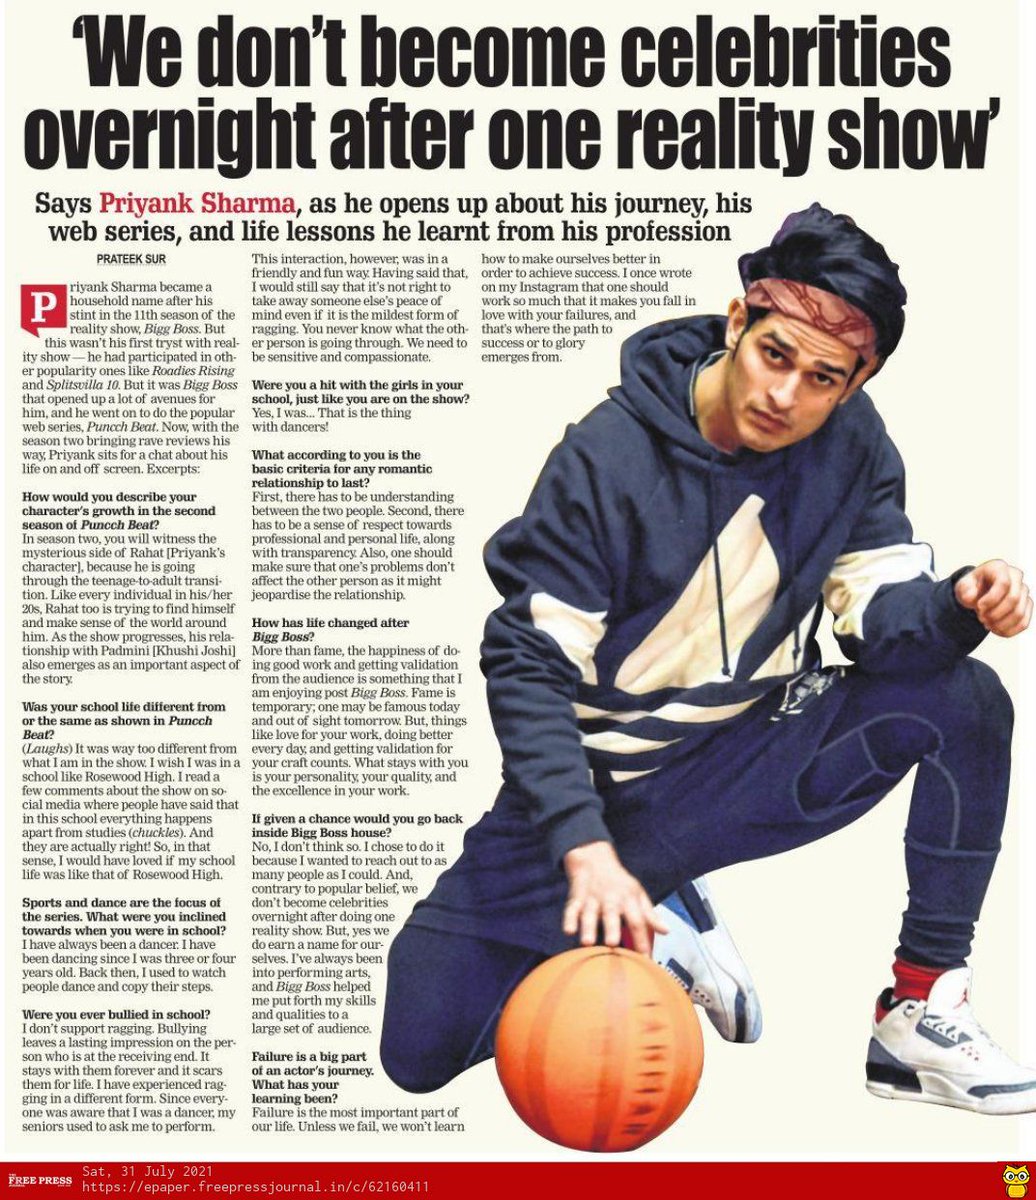 ‘We don’t become celebrities overnight after one reality show’: @ipriyanksharmaa opens up about his journey By @iPrats freepressjournal.in/entertainment/…